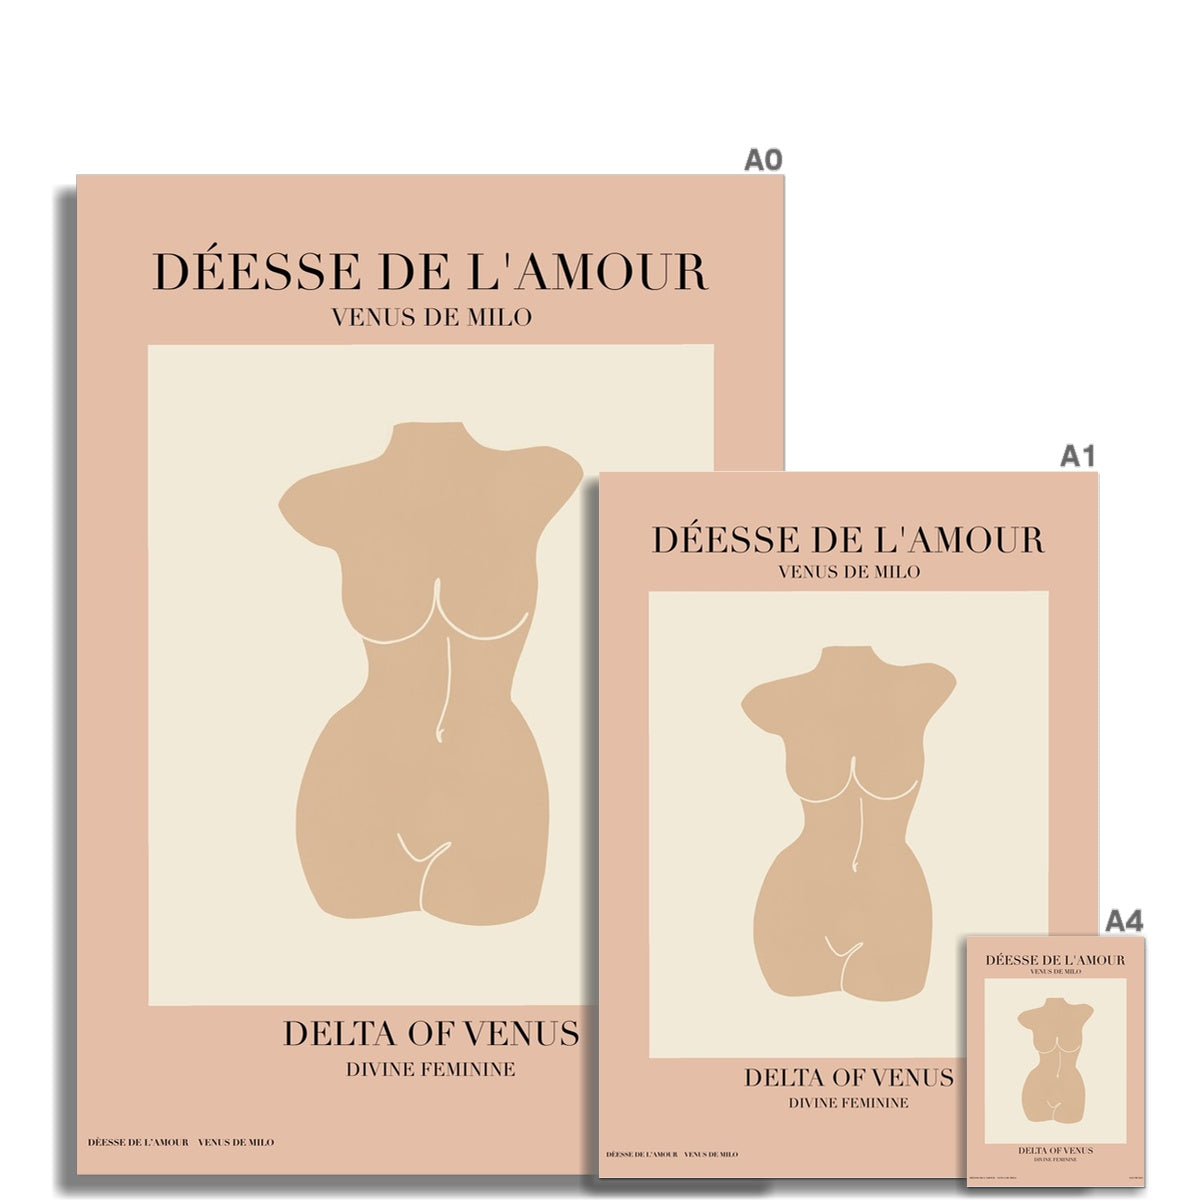 © les muses / Divine Feminine is a dreamy wall art collection featuring line art drawings of the female figure. The minimalist feminine art prints add a vintage touch to any wall gallery.